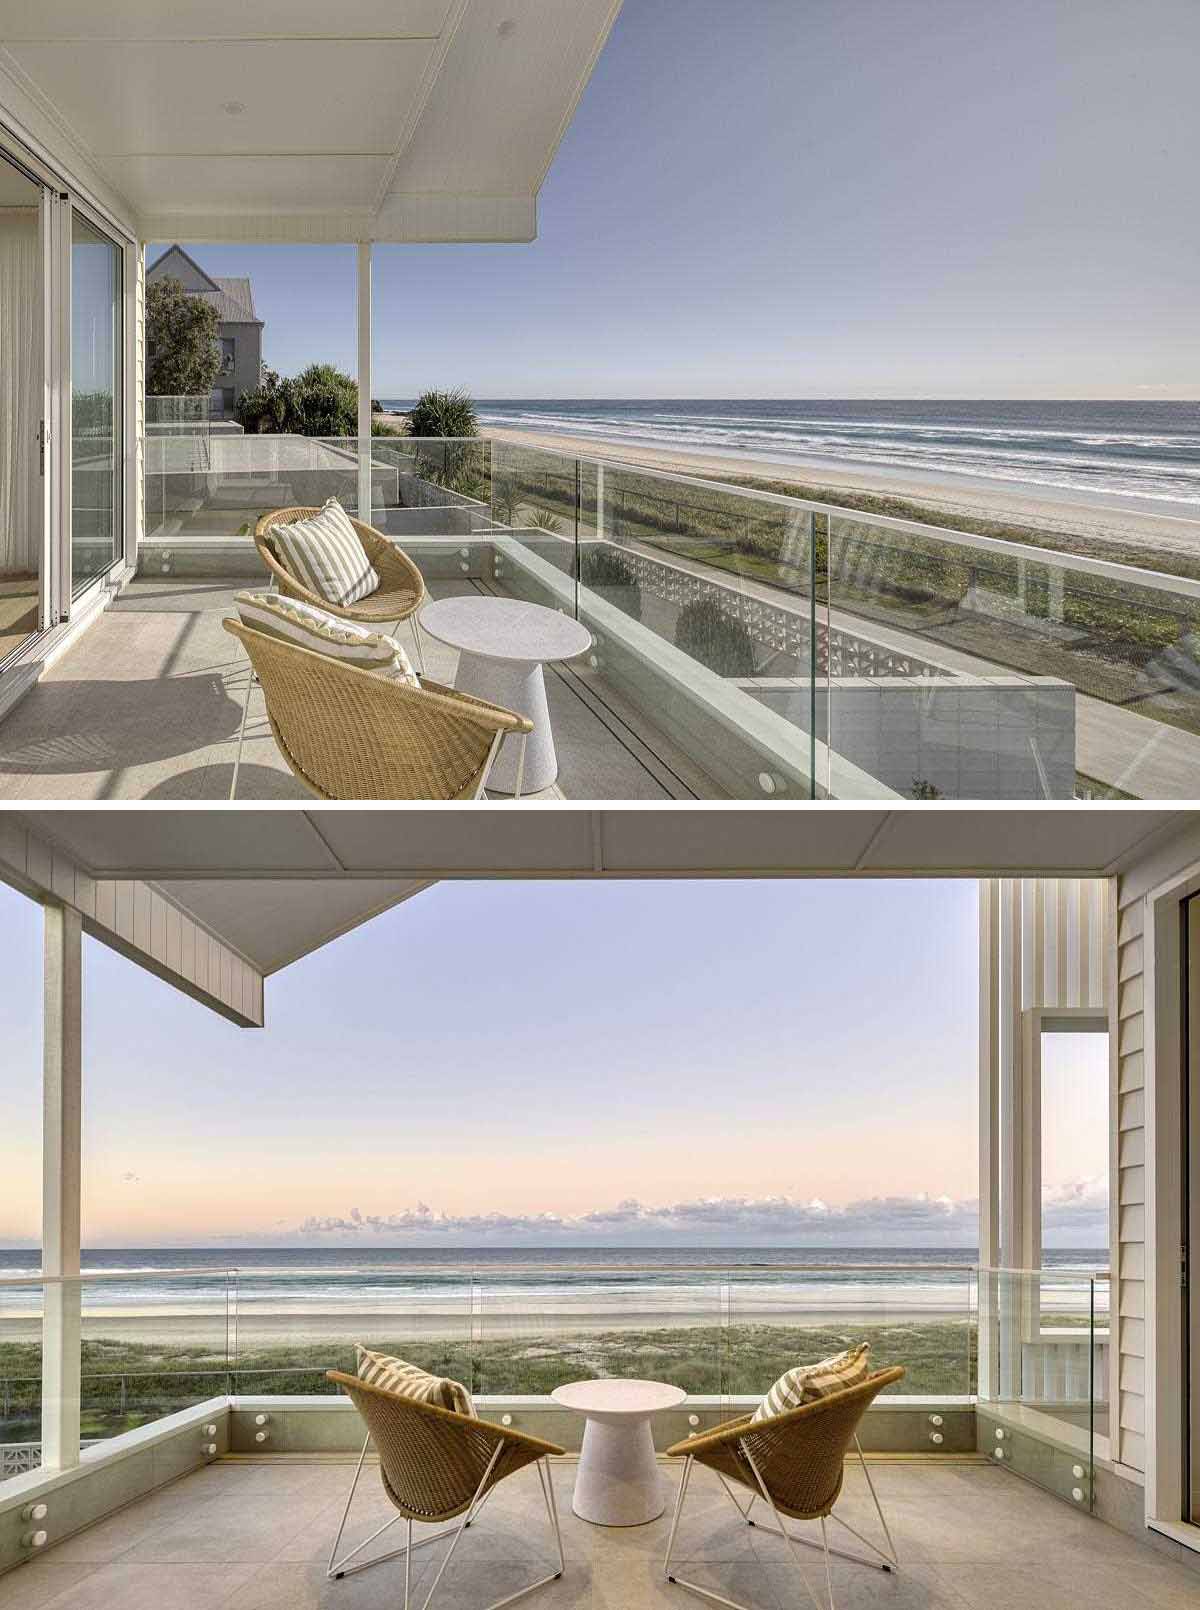 A modern coastal home with a covered balcony that look out to the beach.